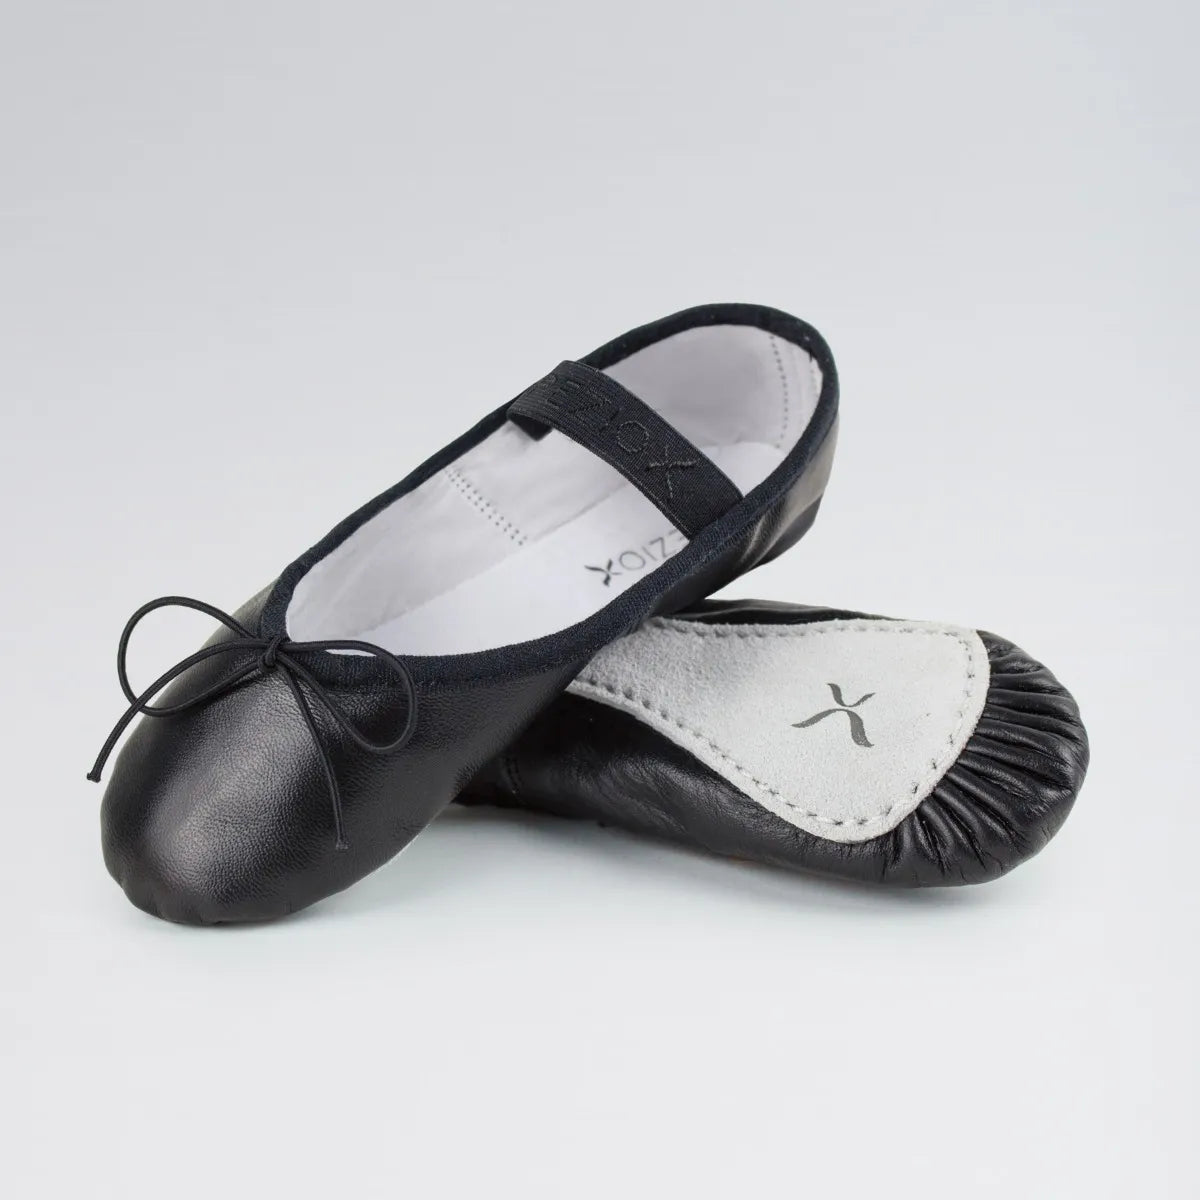 'Daisy' Leather Black Ballet Shoes